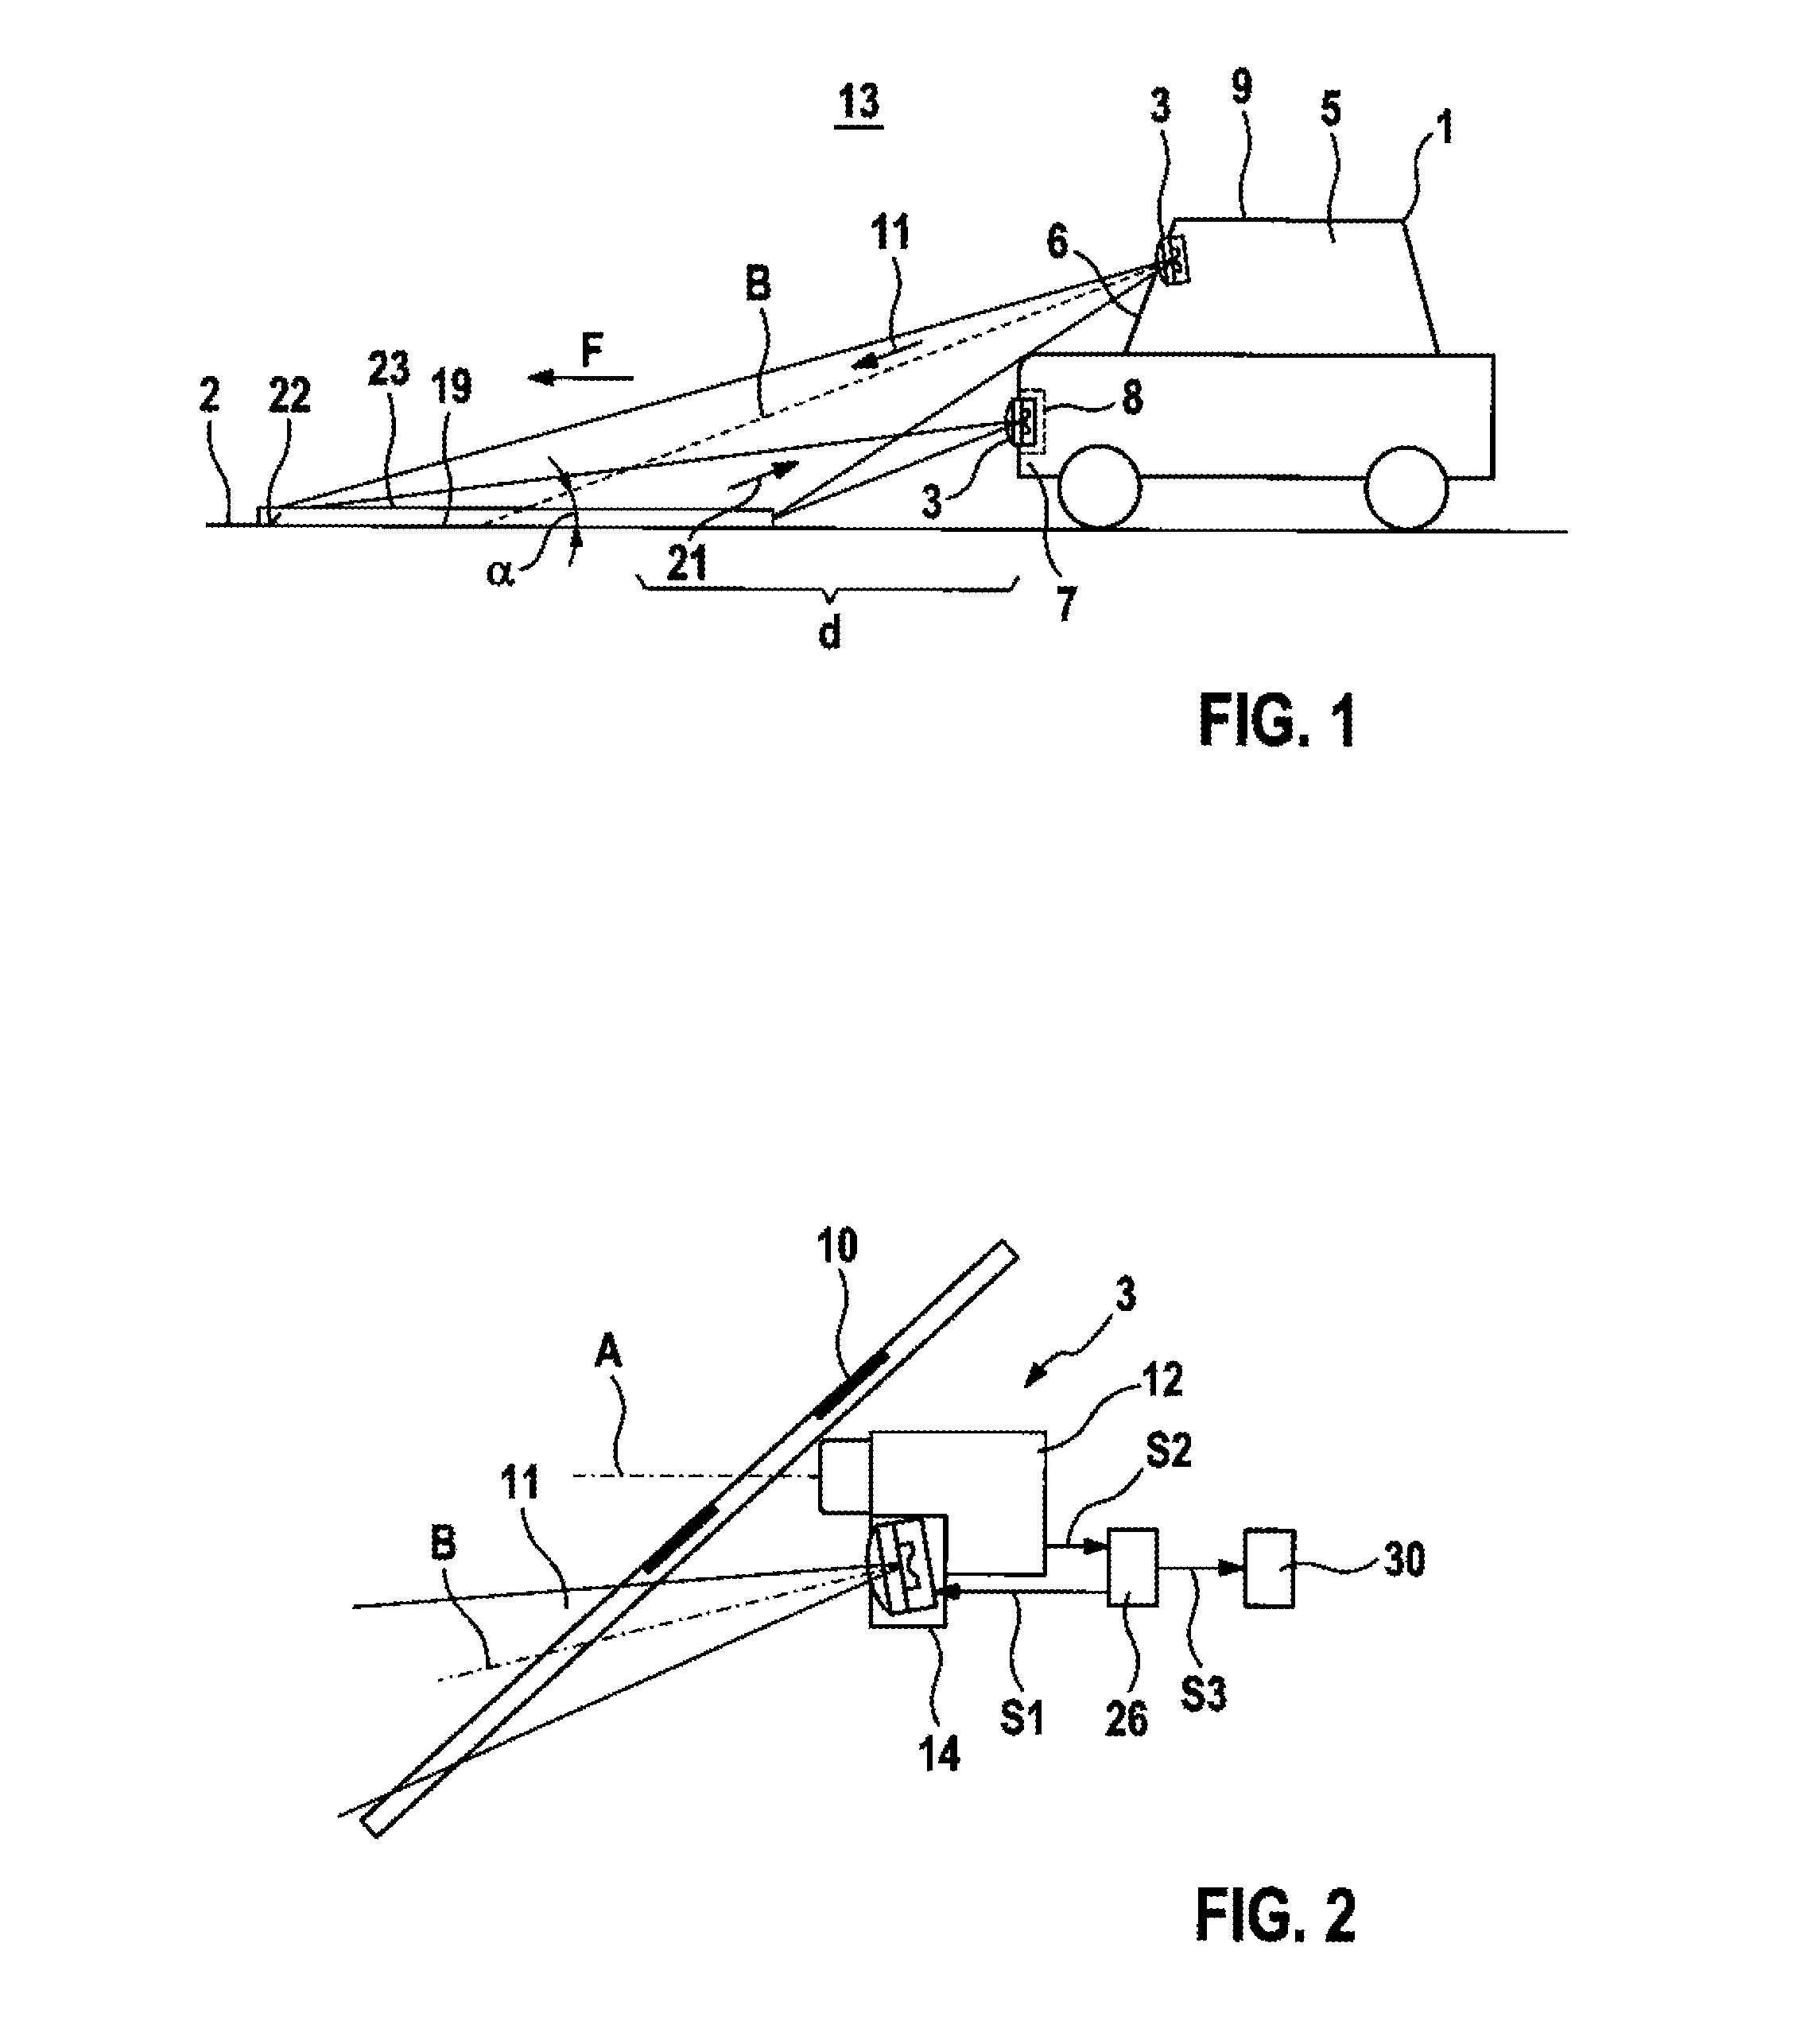 Method for detecting a roadway and corresponding detection systems